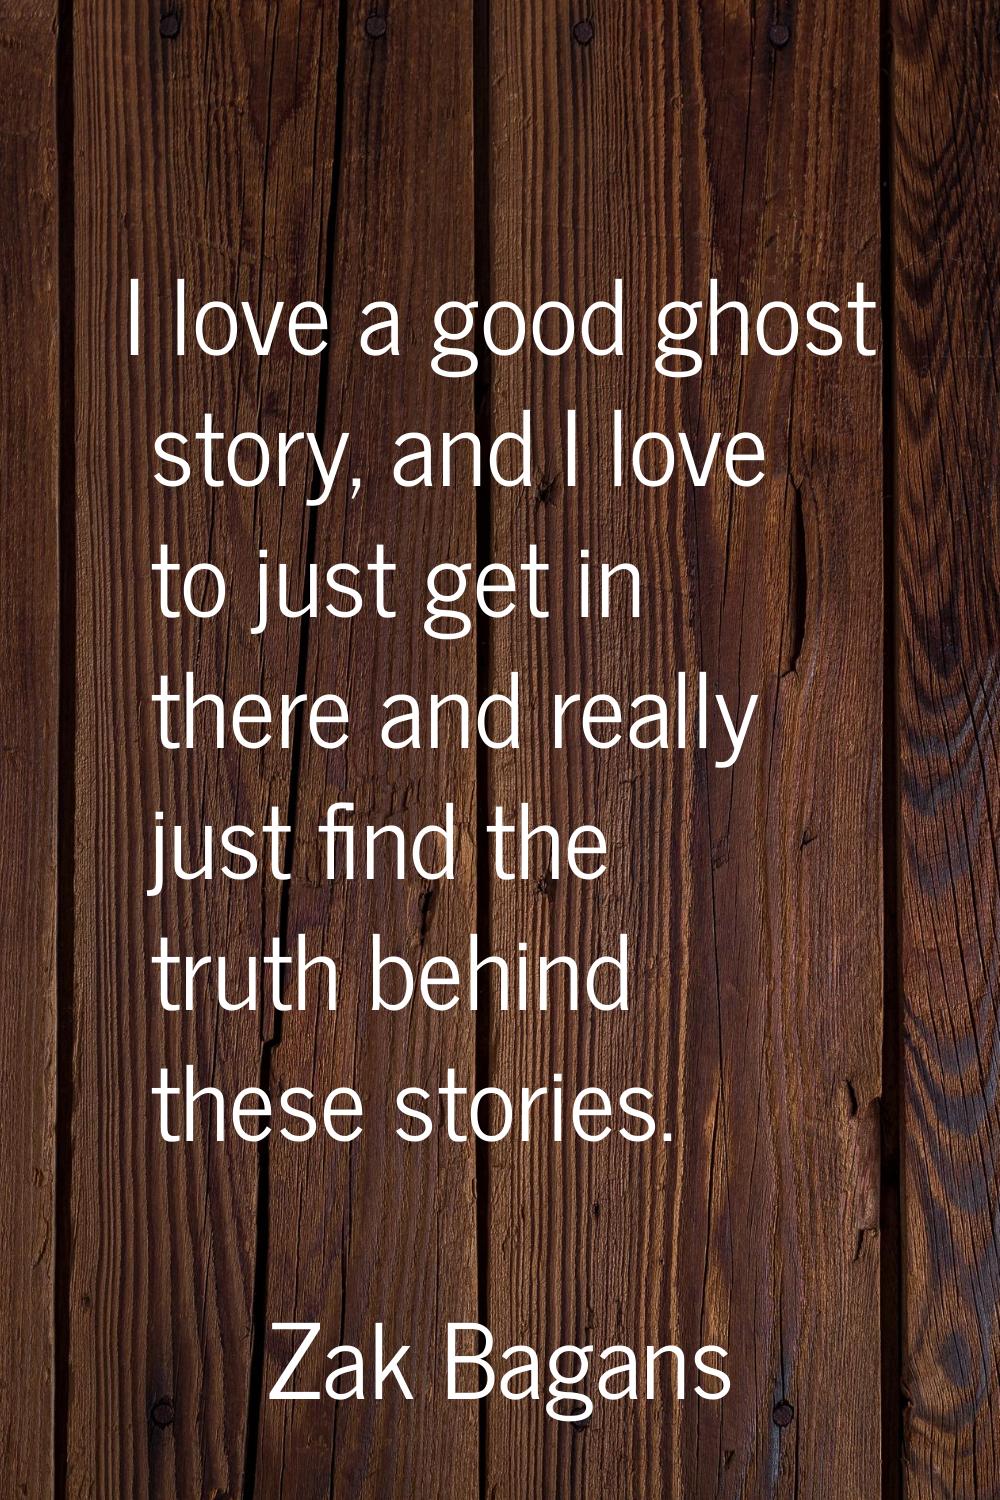 I love a good ghost story, and I love to just get in there and really just find the truth behind th